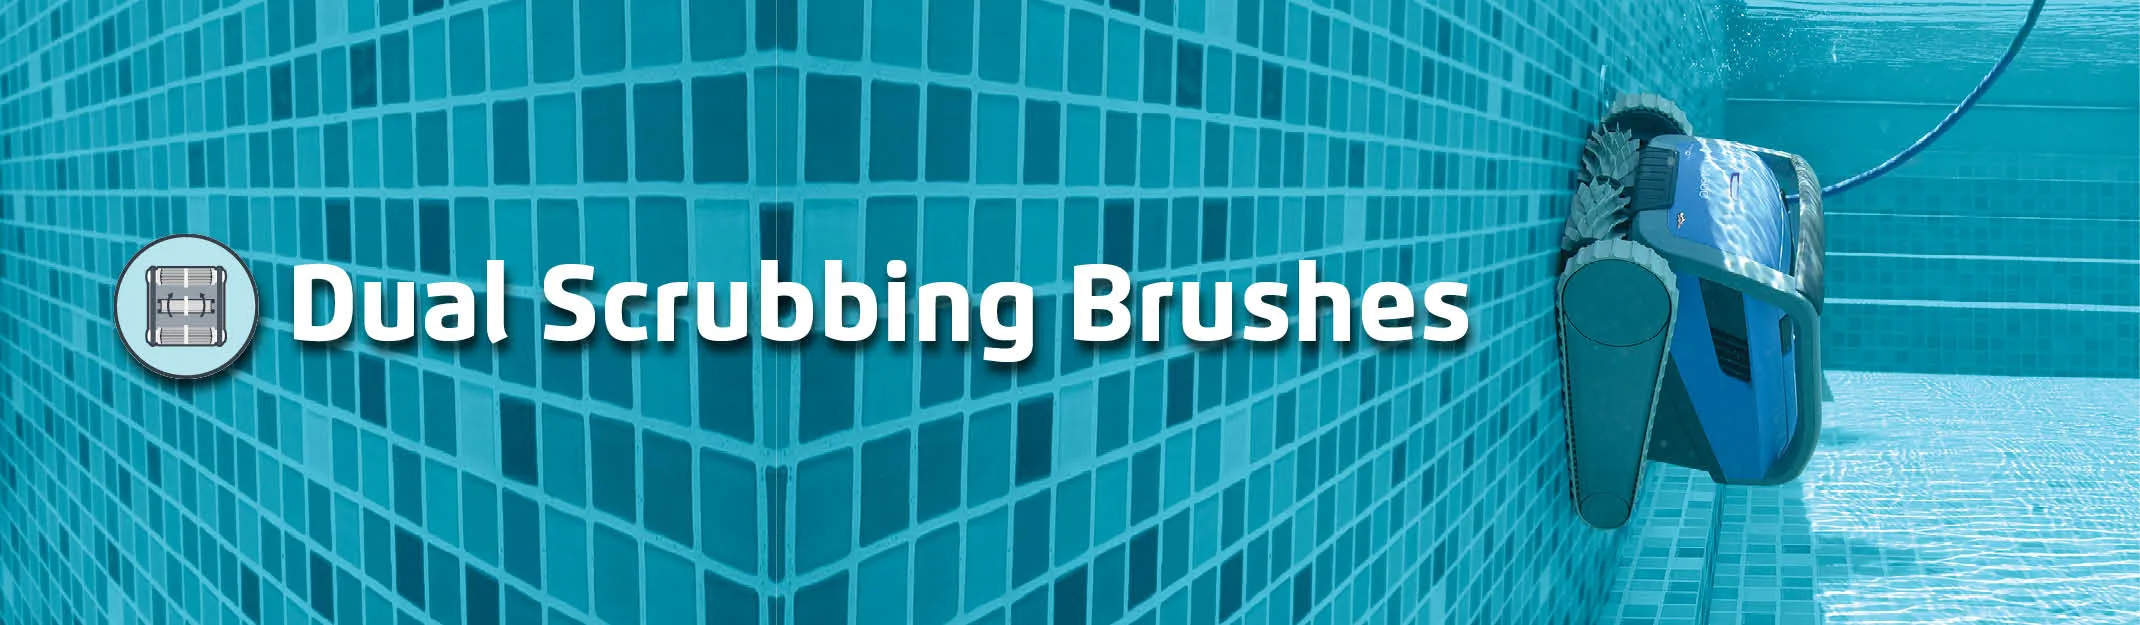 Active dual scrubbing brushes